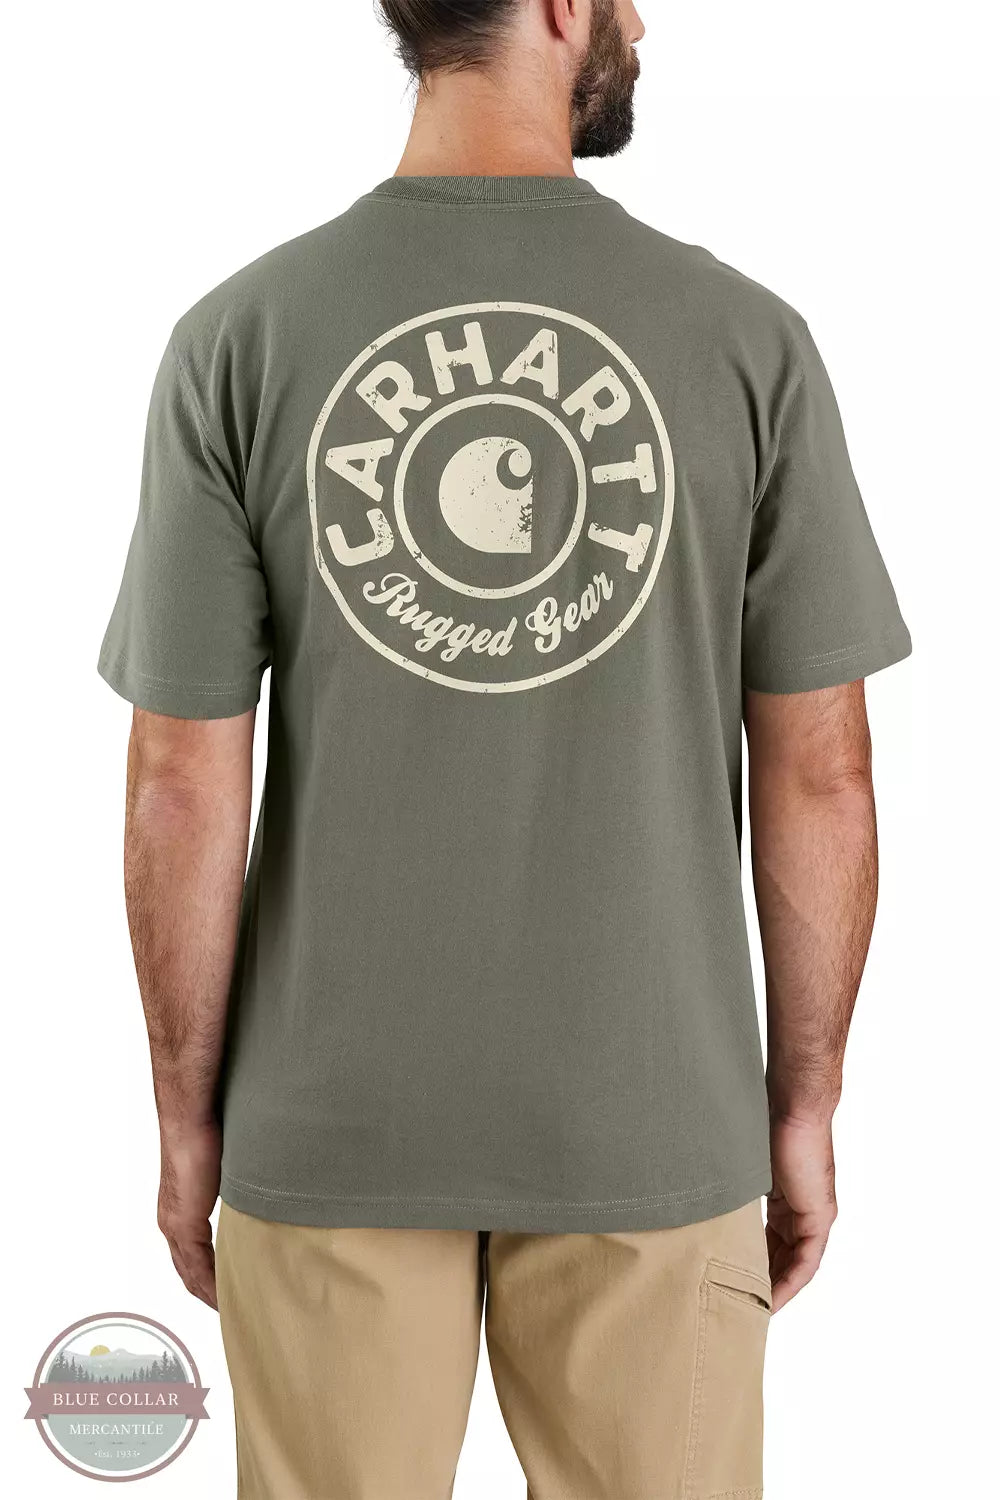 Carhartt 106154 Built to Last Graphic Loose Fit Heavyweight Short Sleeve T-Shirt Dusty Olive Back View - Two Colors